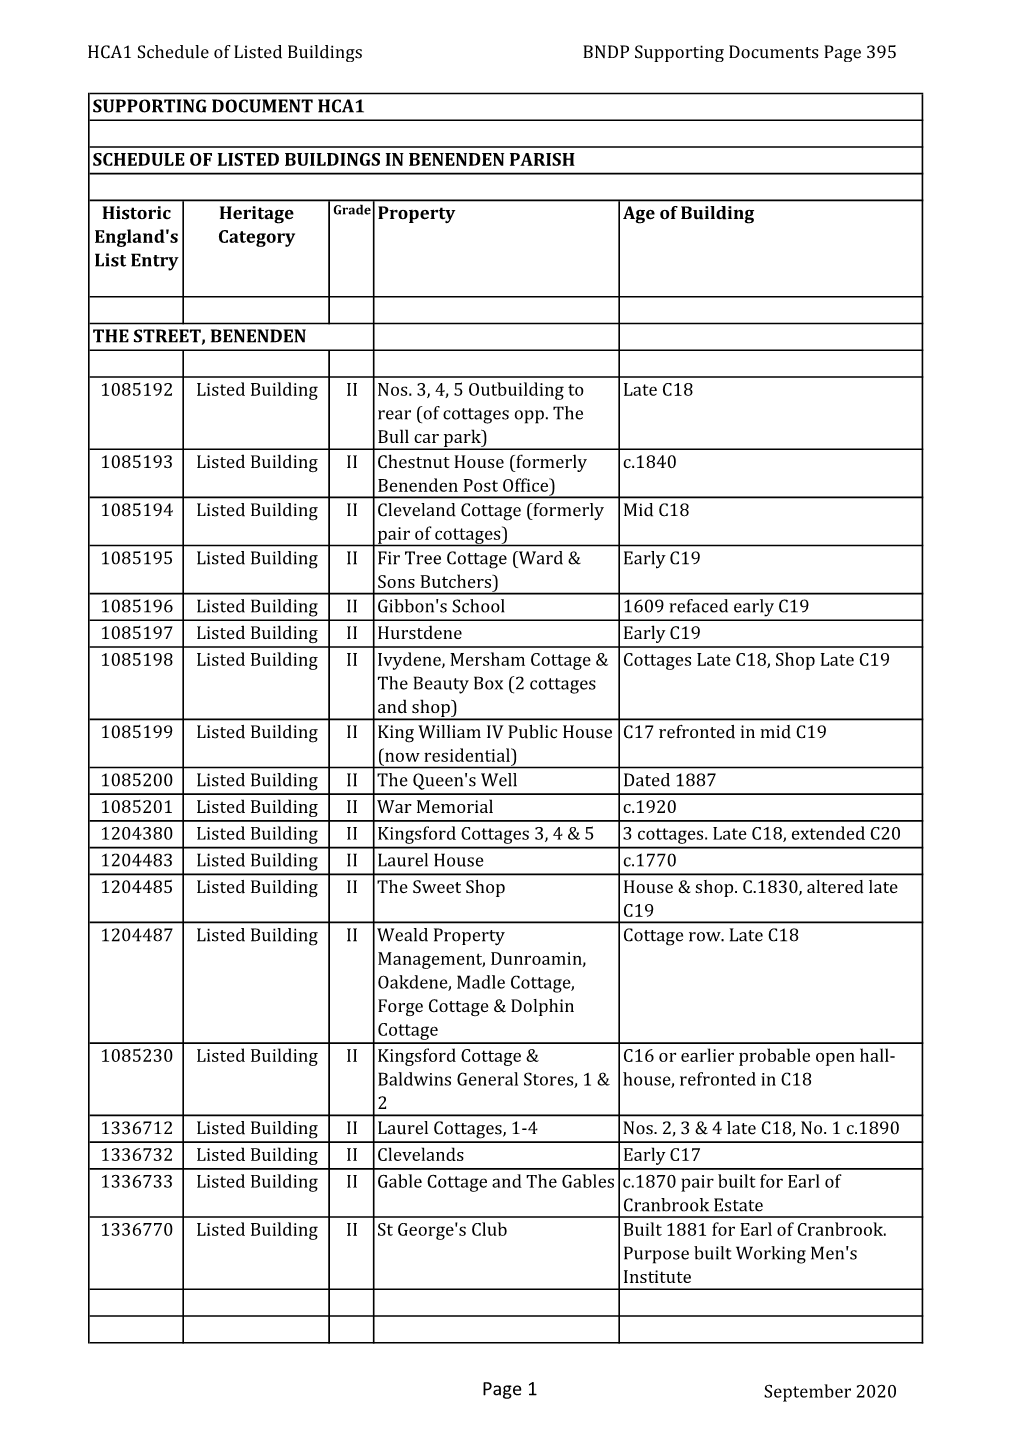 HCA1 Schedule of Listed Buildings BNDP Supporting Documents Page 395